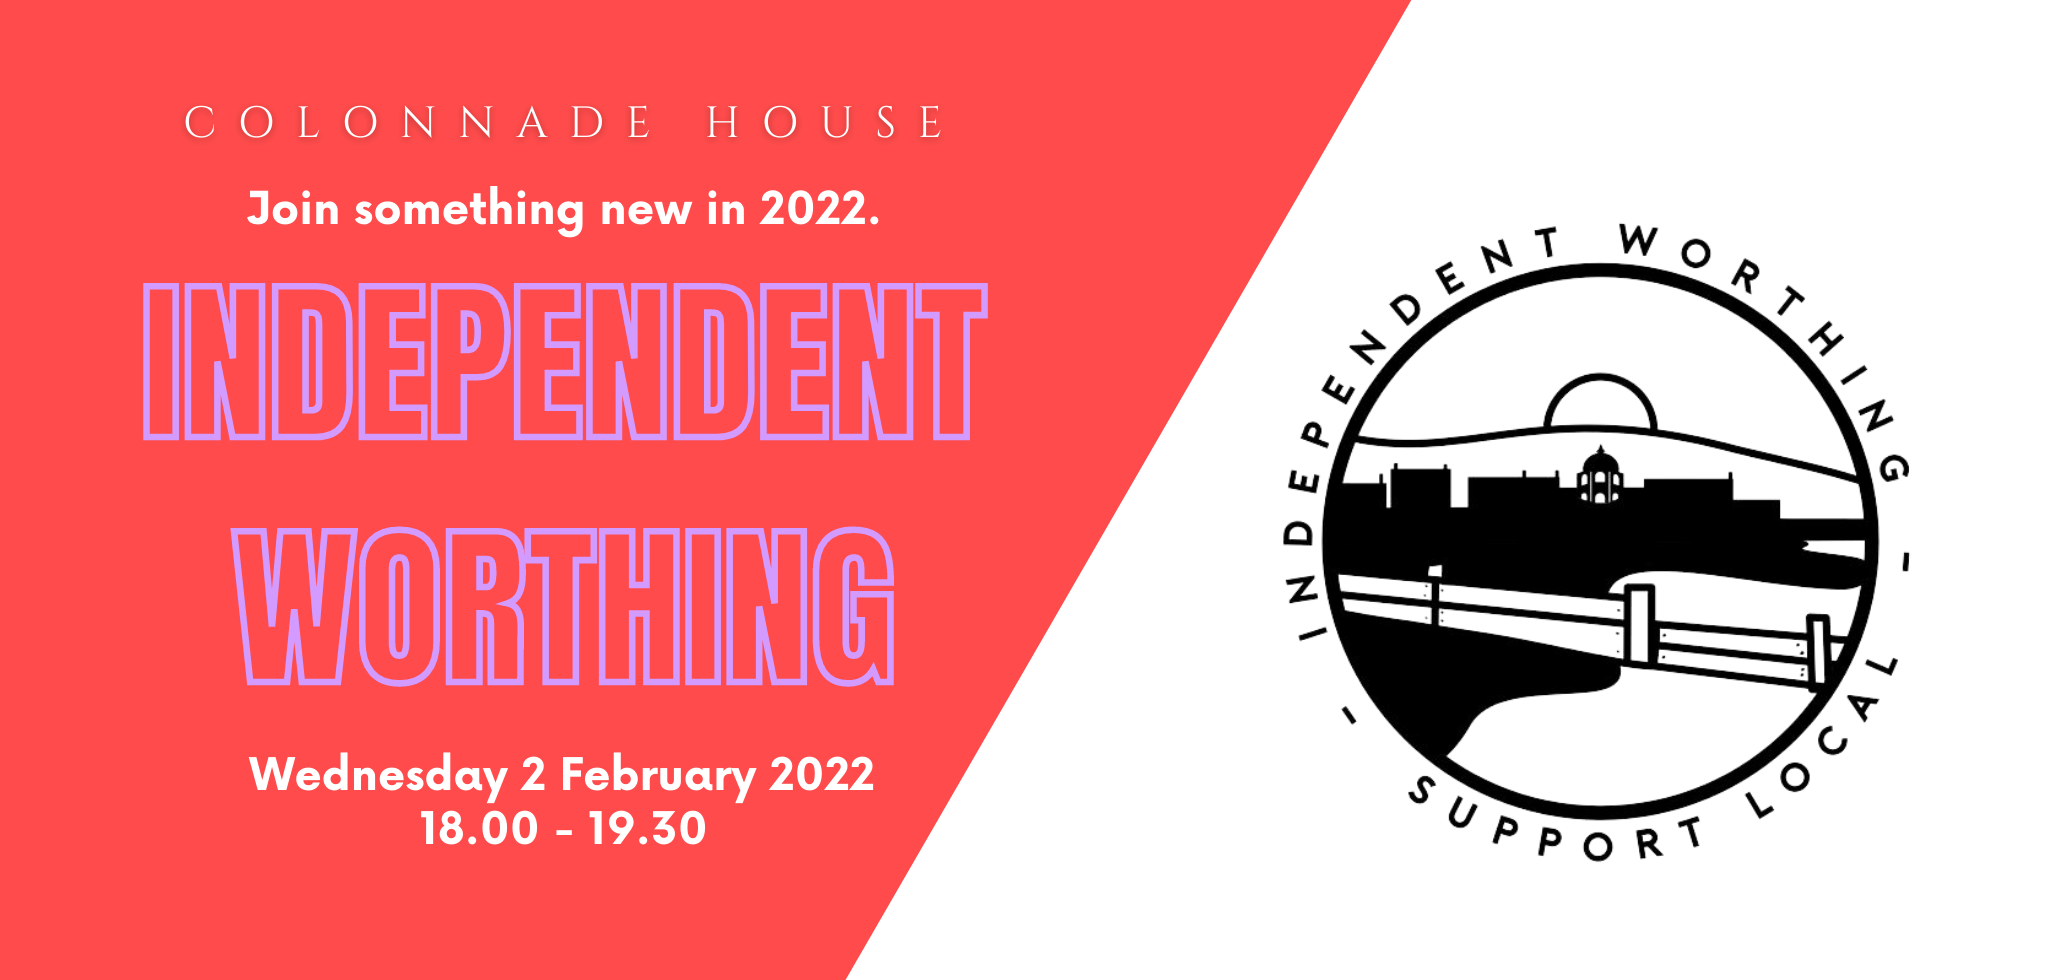 Independent Worthing at Colonnade House